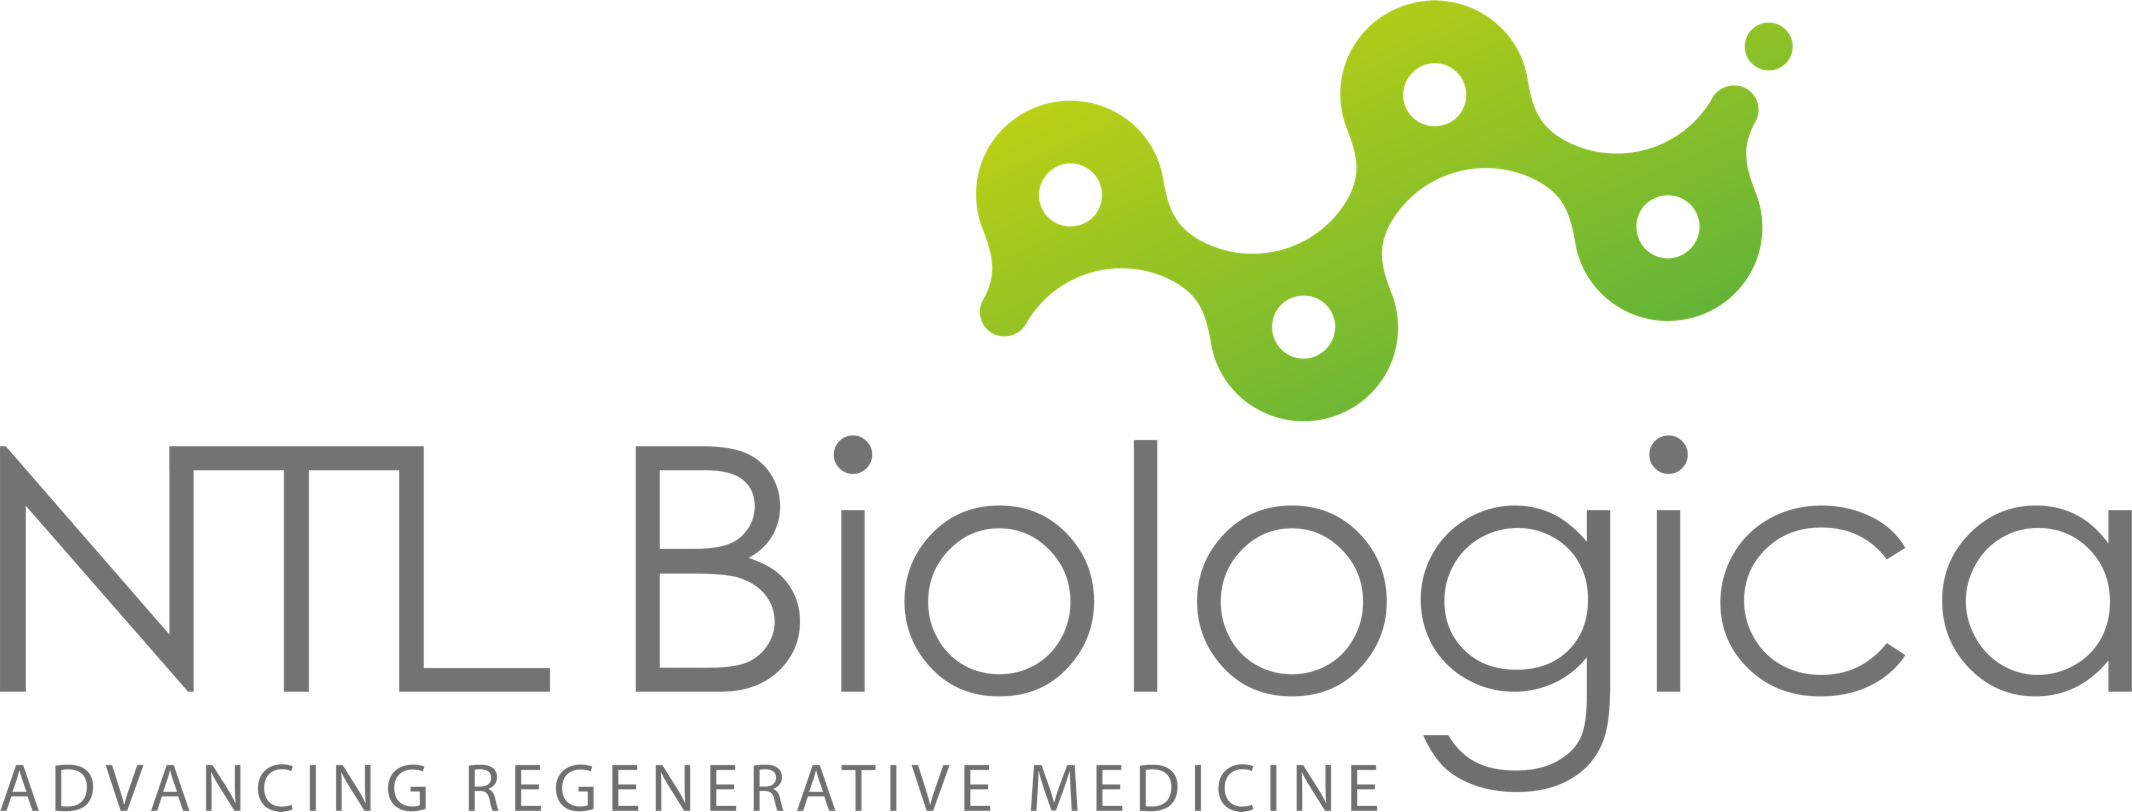 NTL Biologica Stem Cell Cellular Therapy